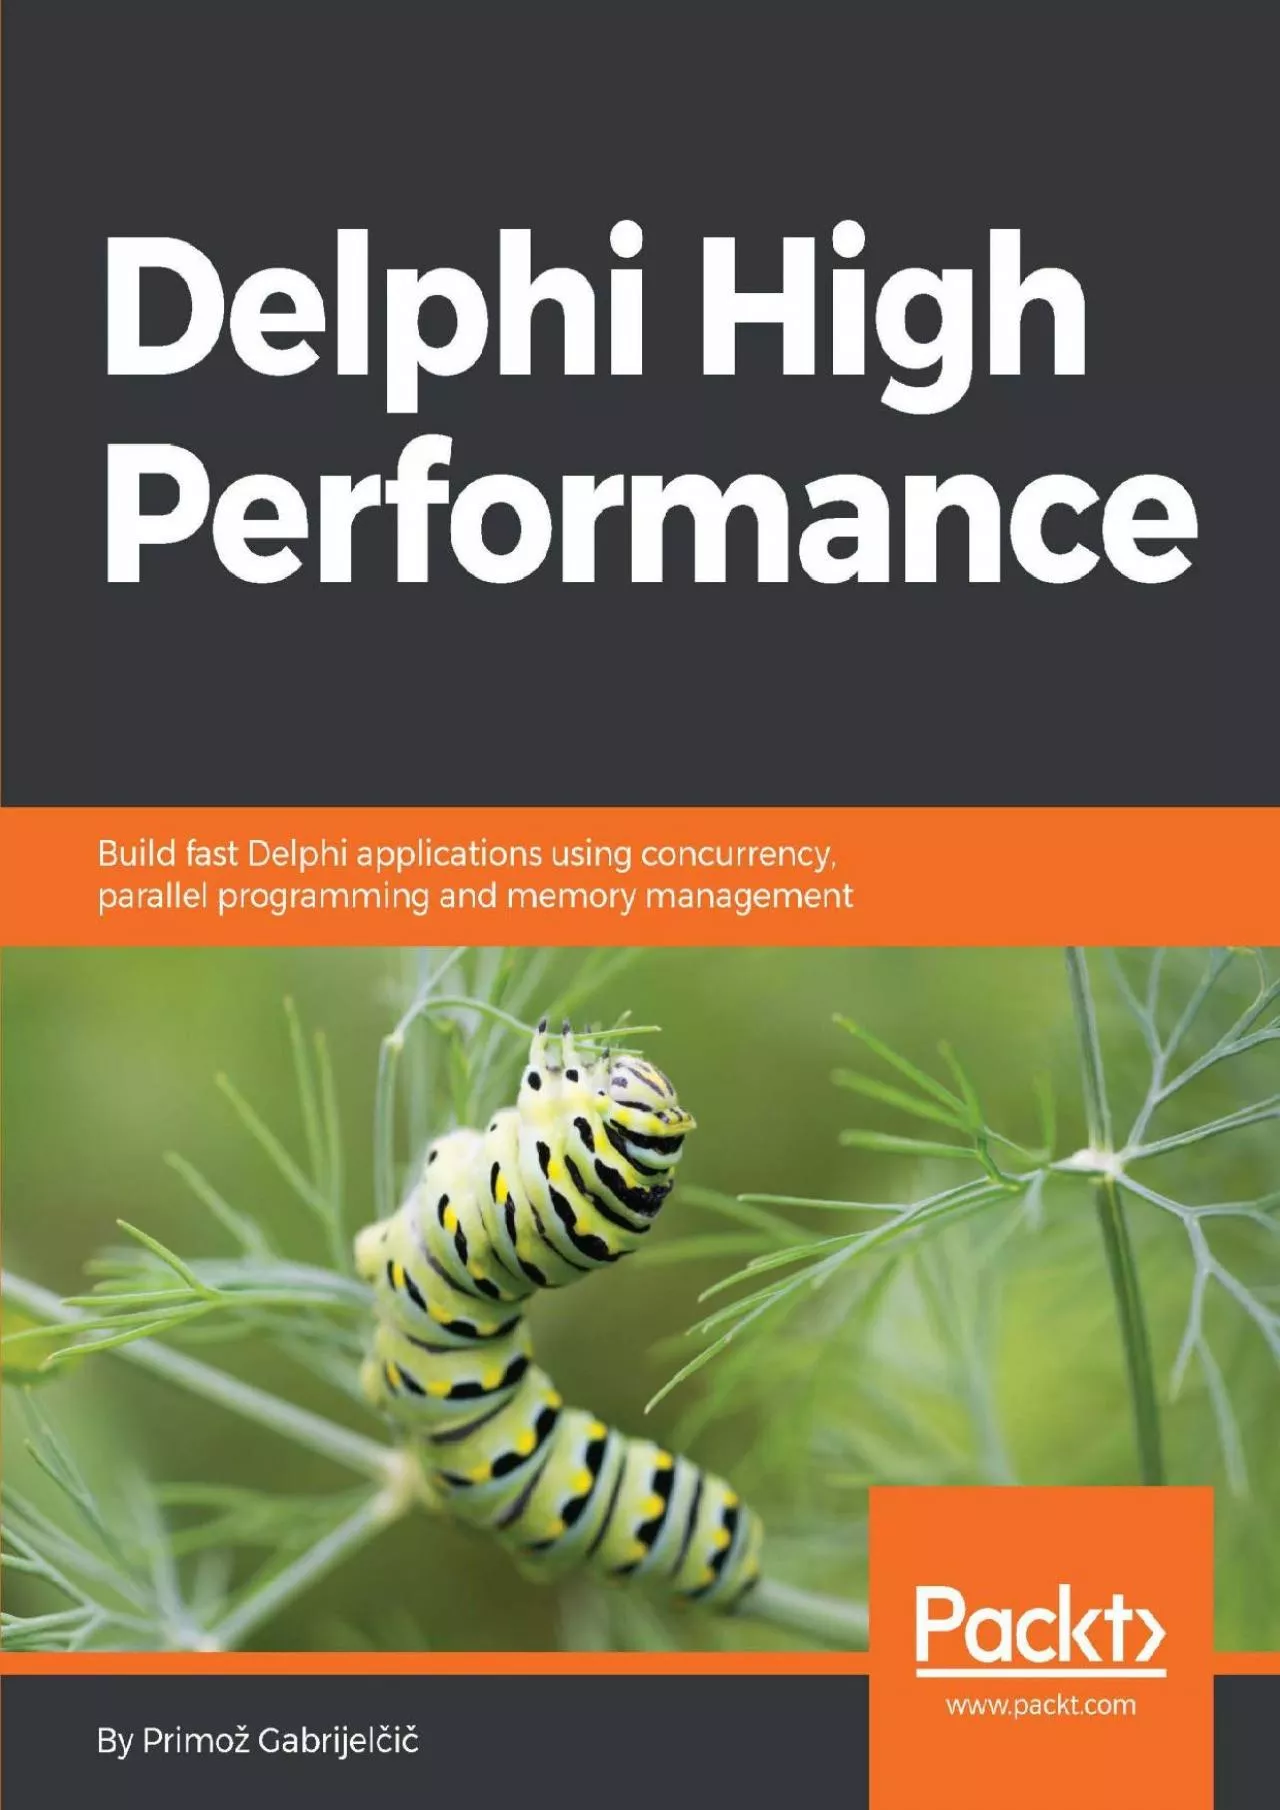 [READING BOOK]-Delphi High Performance: Build fast Delphi applications using concurrency,